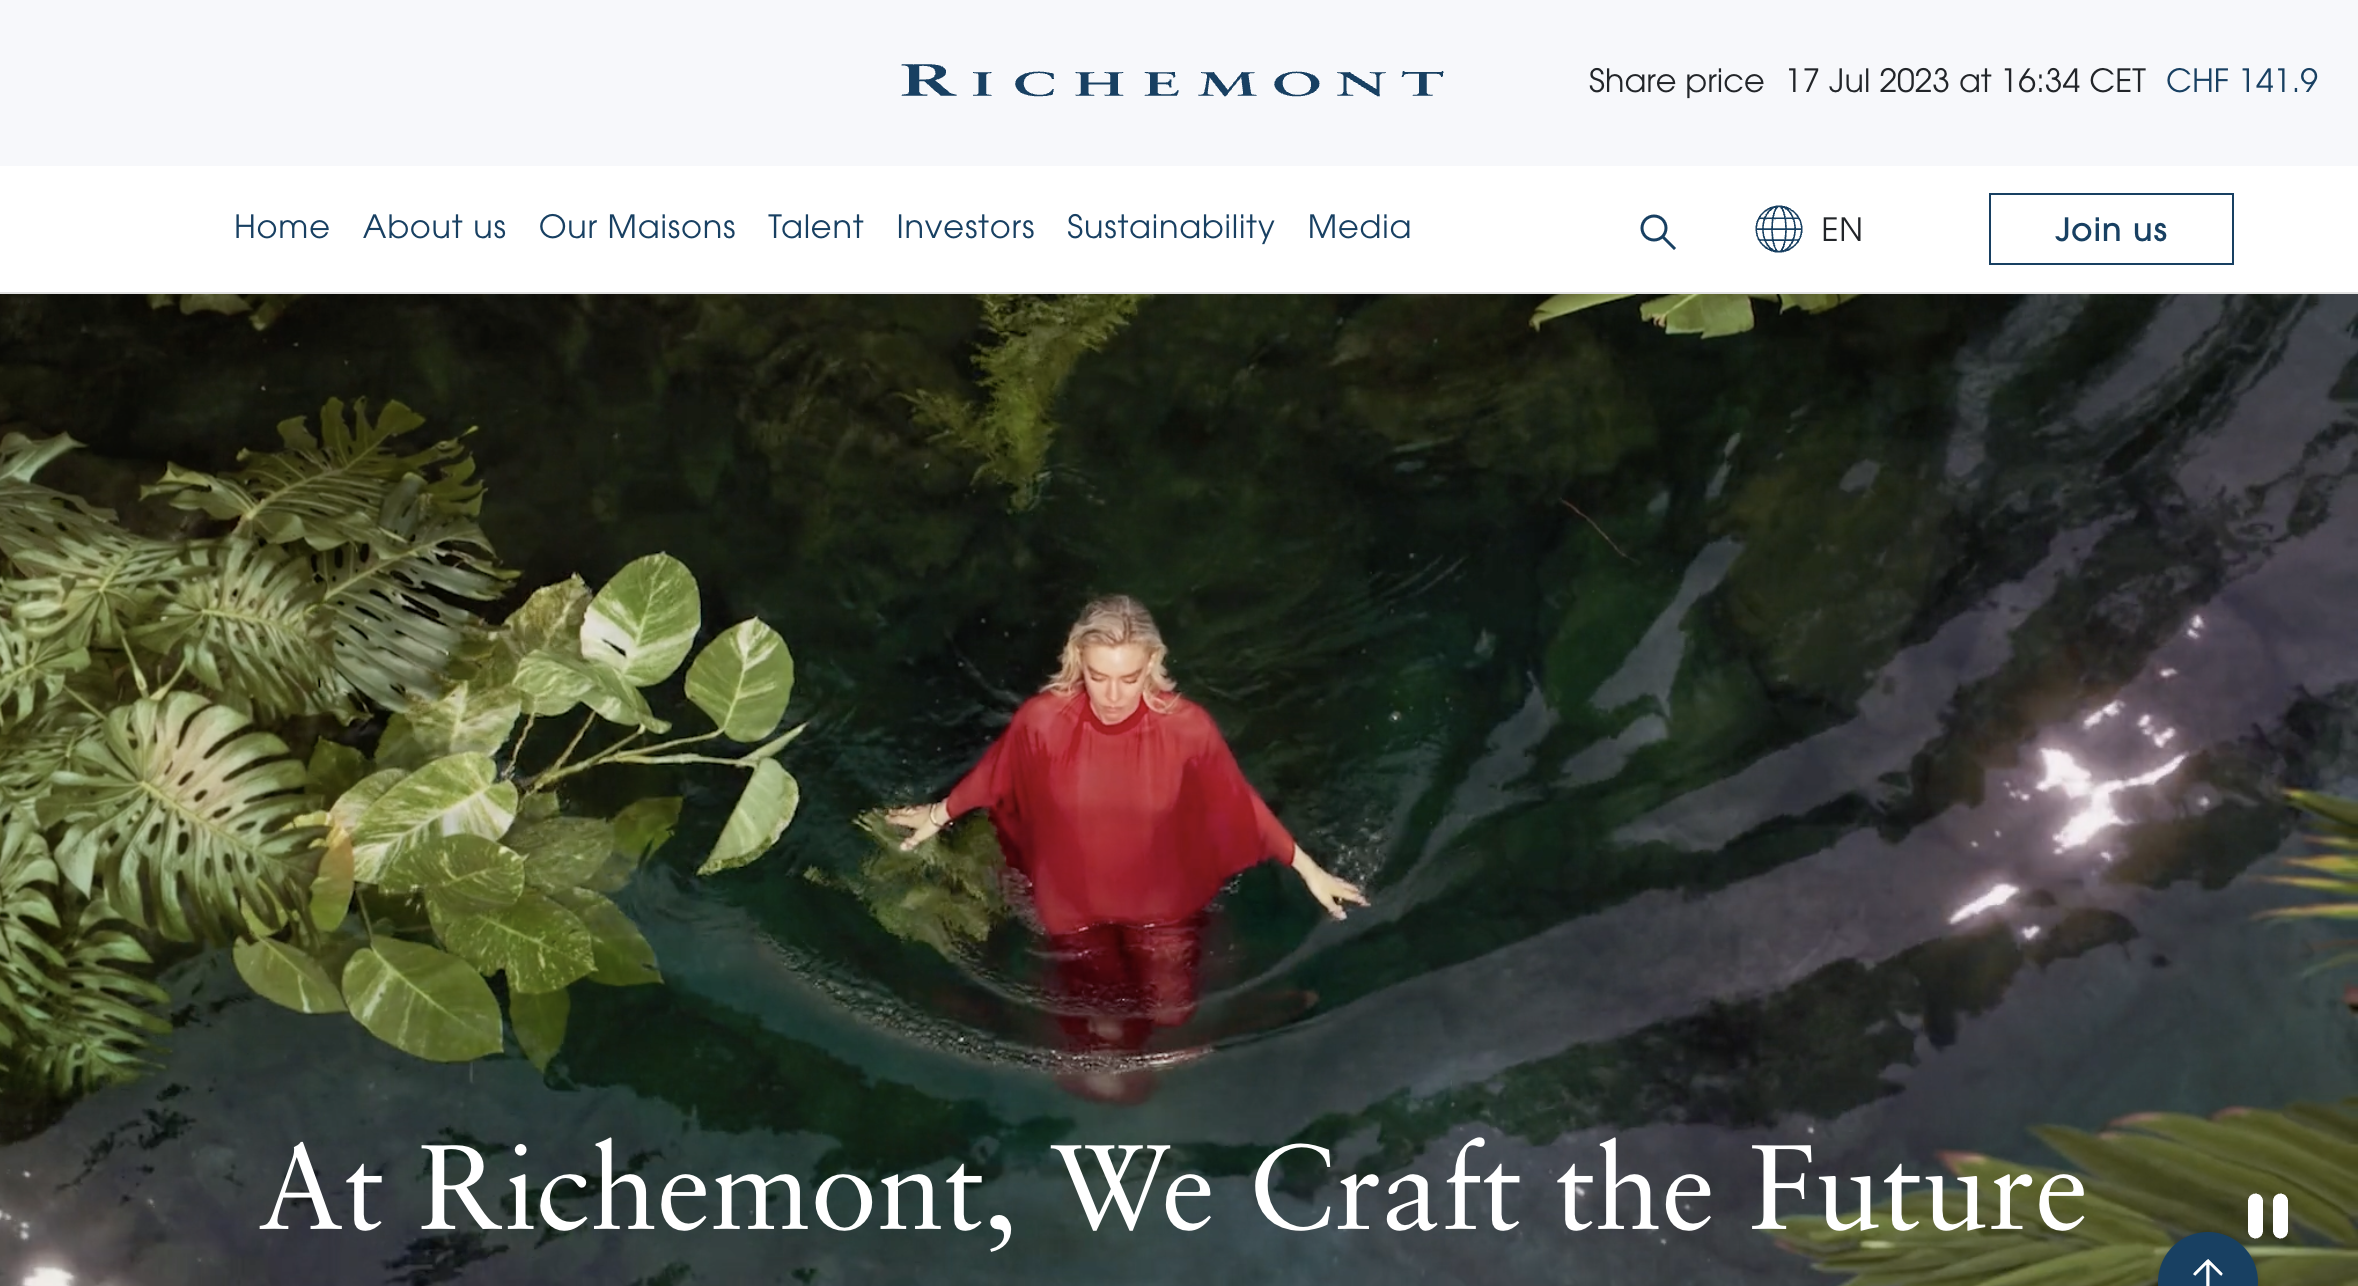 Richemont’s Latest Quarterly Report: Sales Surge by 19% YoY, Strong Rebound in the Chinese Market